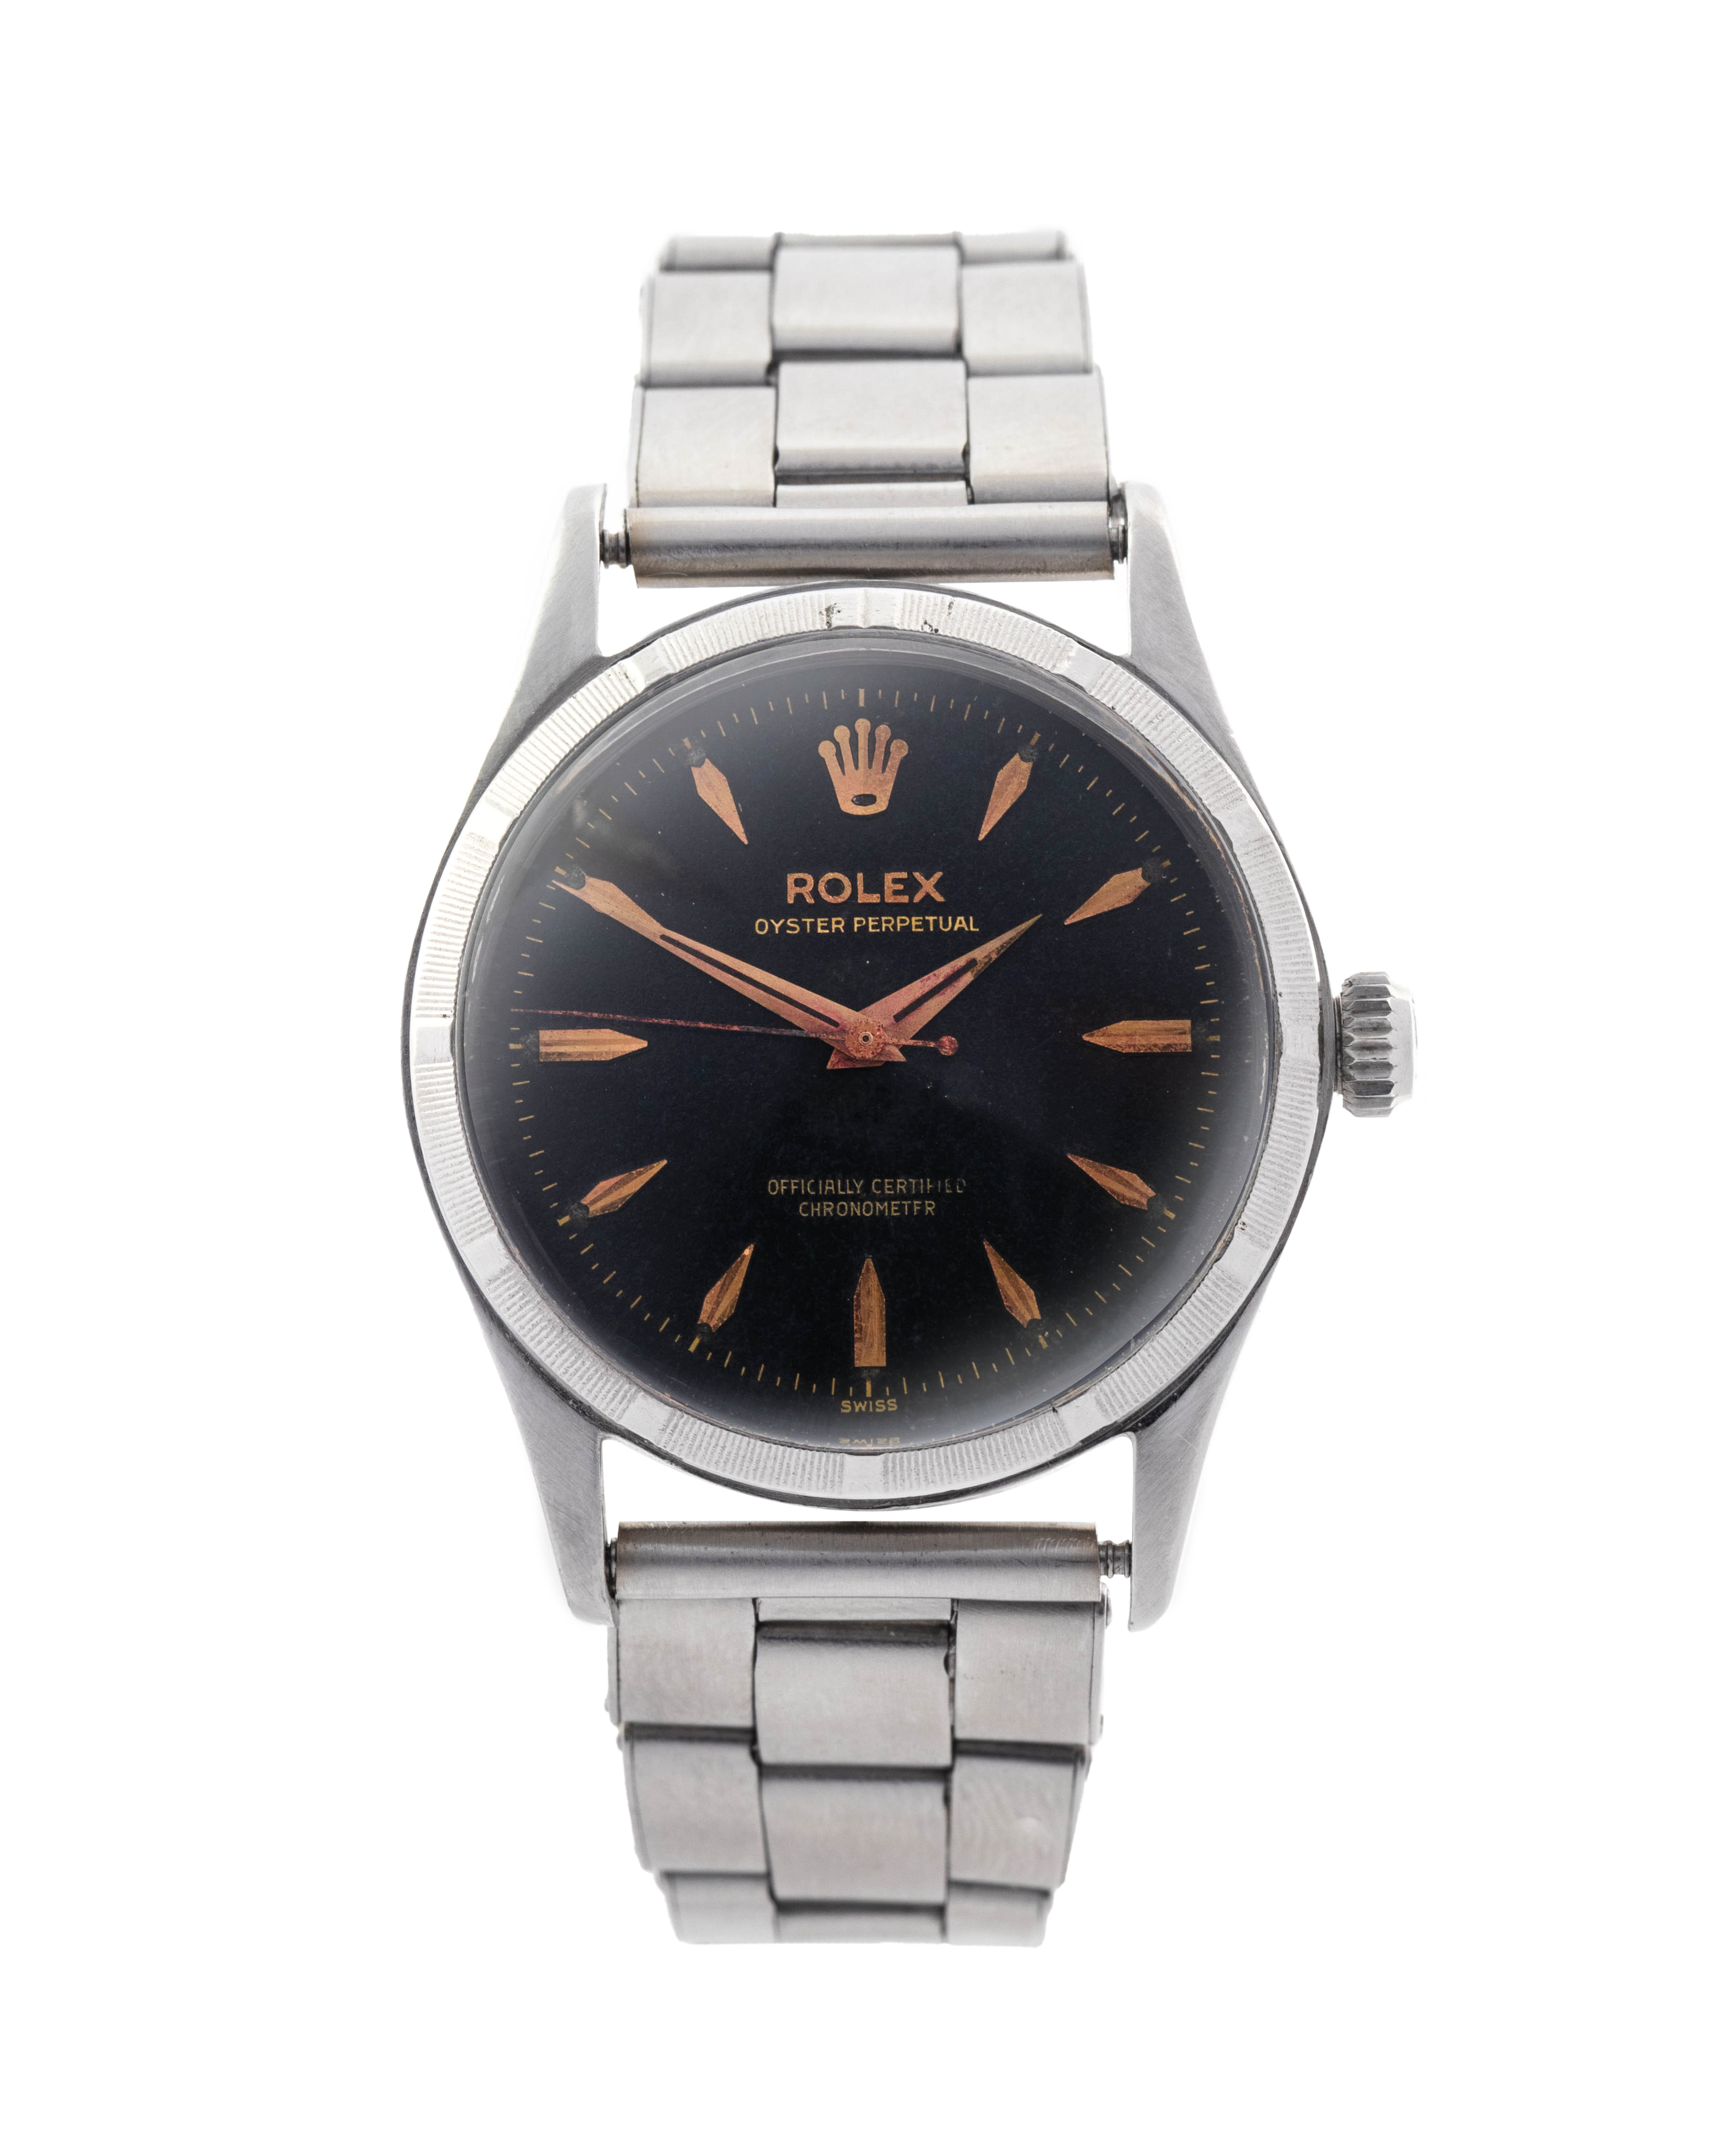 Rolex Ref. 6532 Oyster Perpetual balck dial, rose gold indexes with stainless steel bracelet 